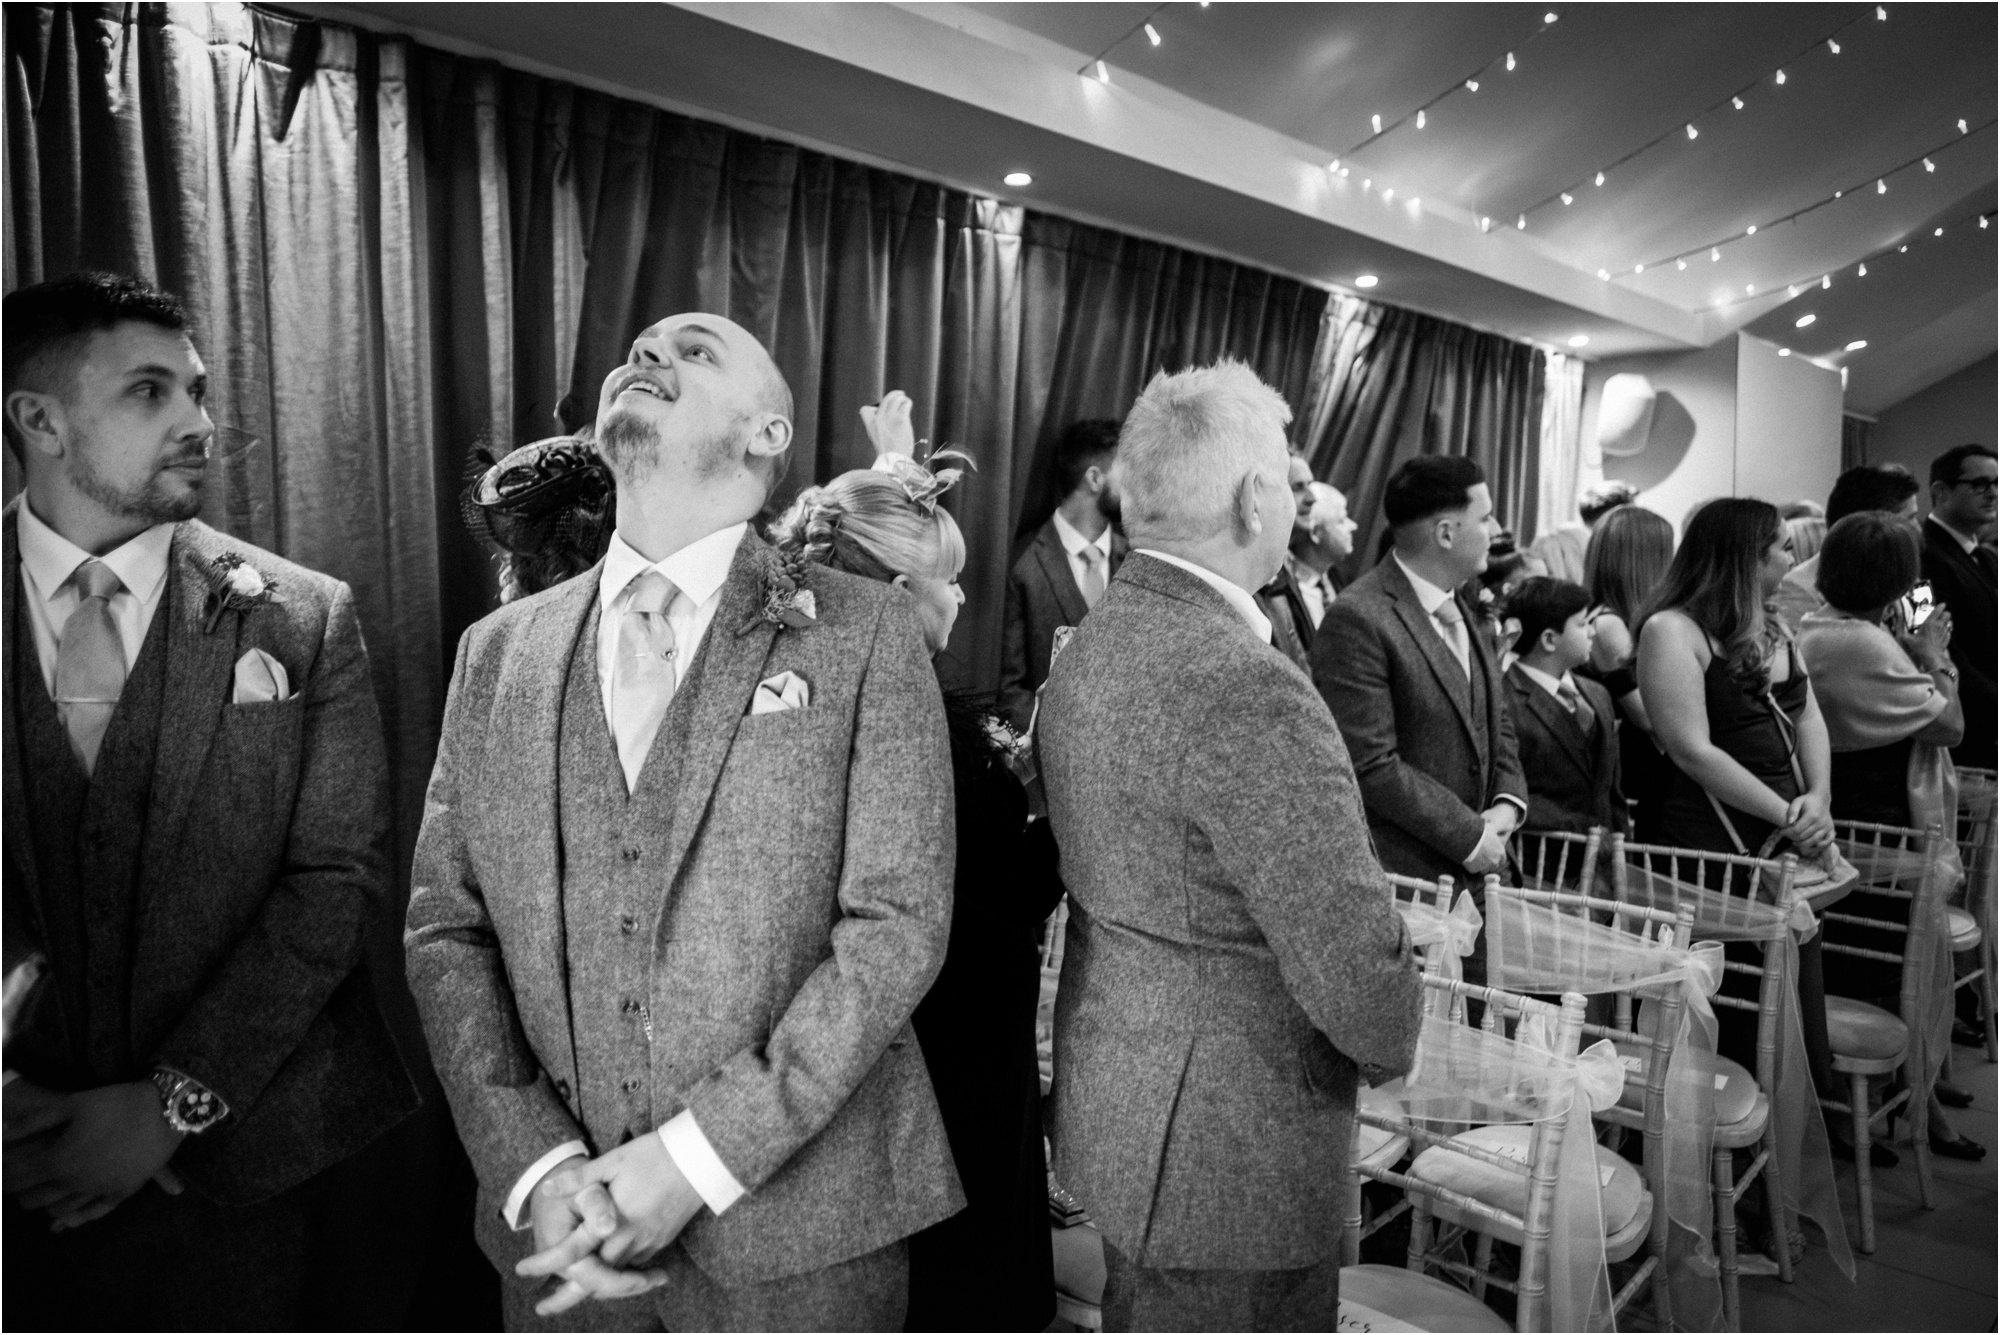 Connie and Lewis's wedding day at Trevenna Farm, photographed by Younger Photography who are Devon wedding photographers